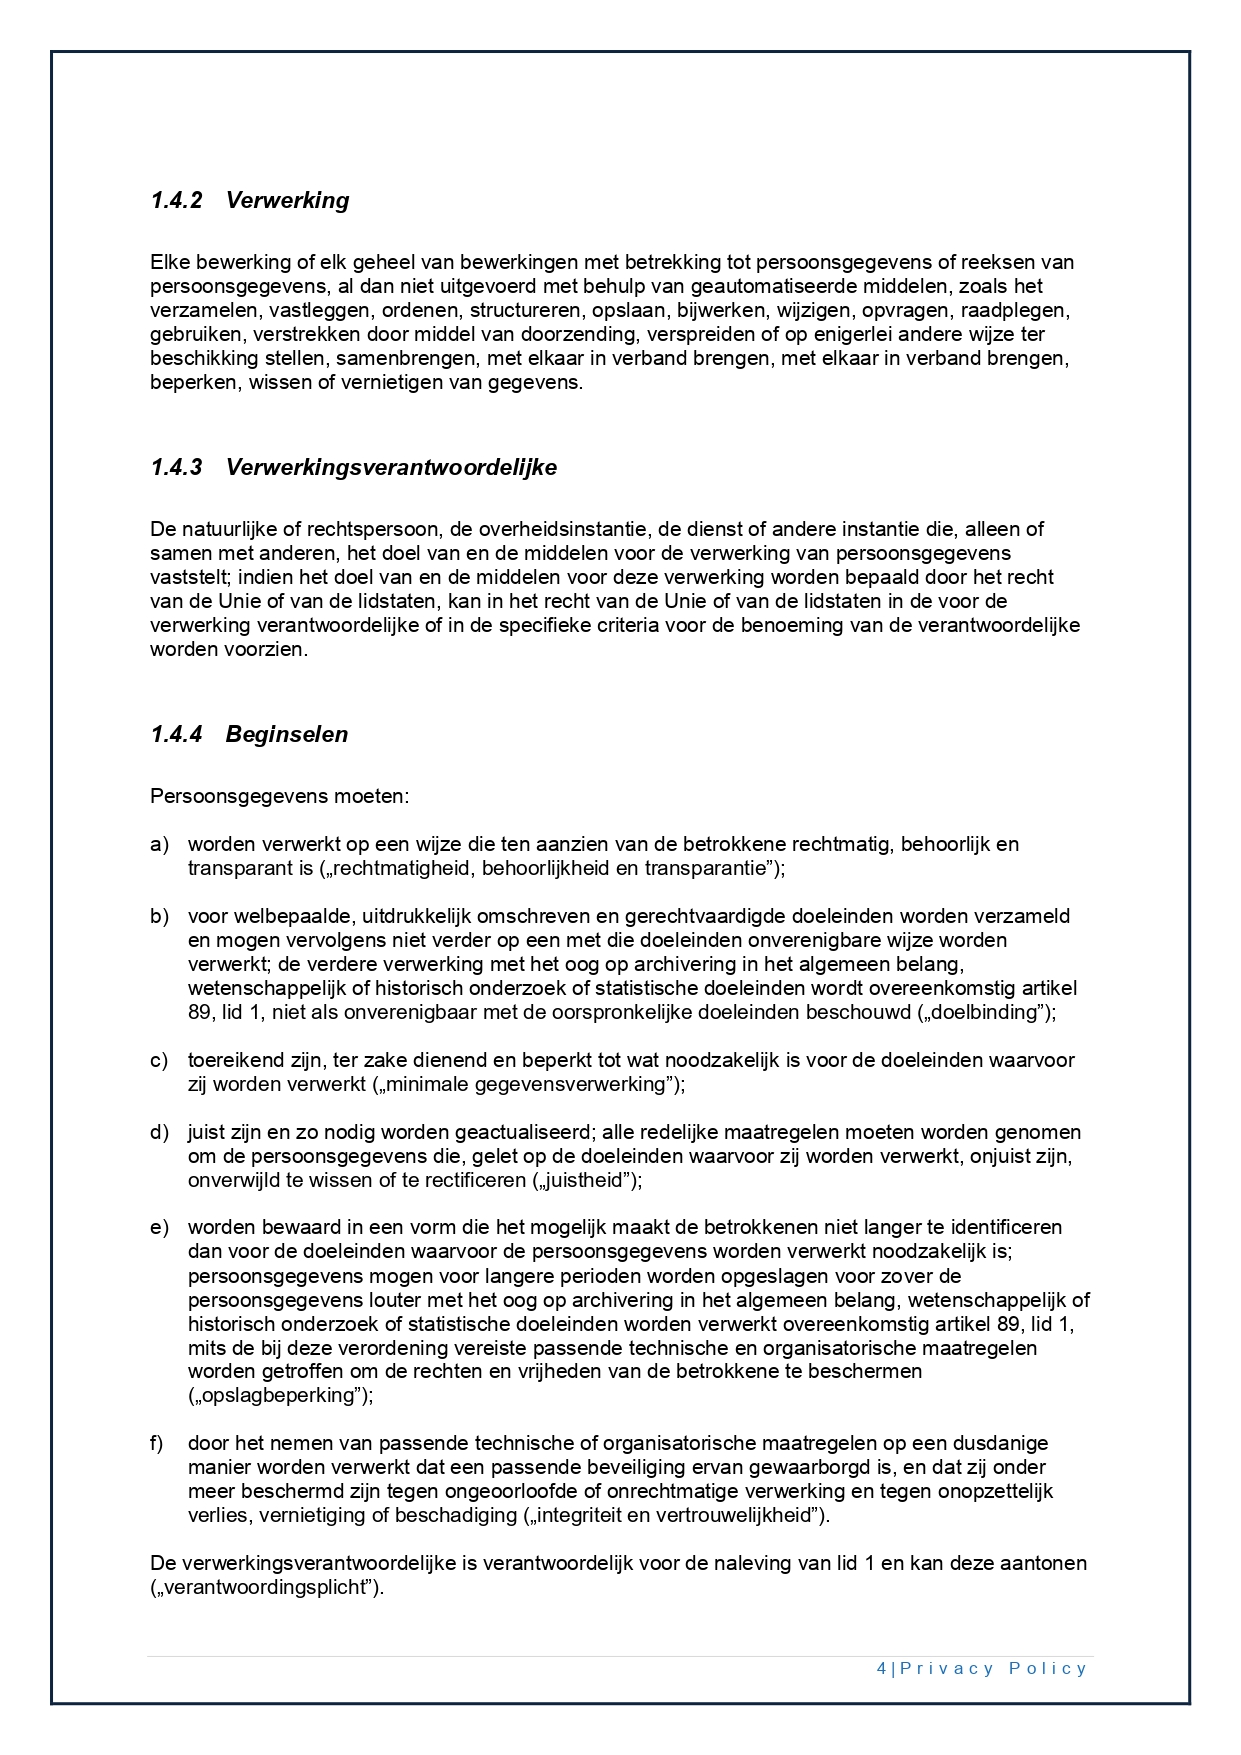 02 Privacy Policy textup.be NL V1.0 page 0004